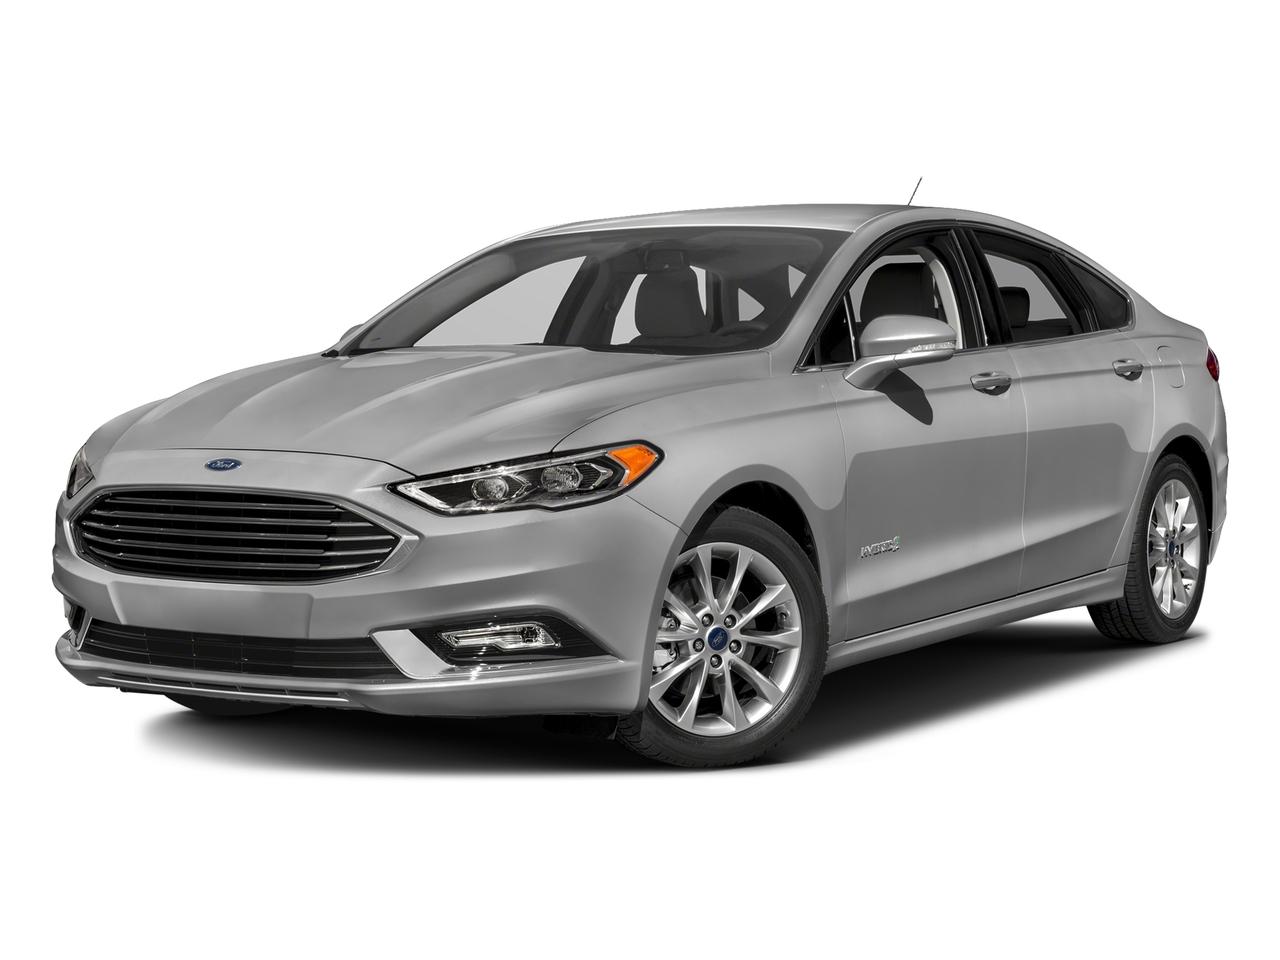 2017 Ford Fusion Vehicle Photo in Saint Charles, IL 60174